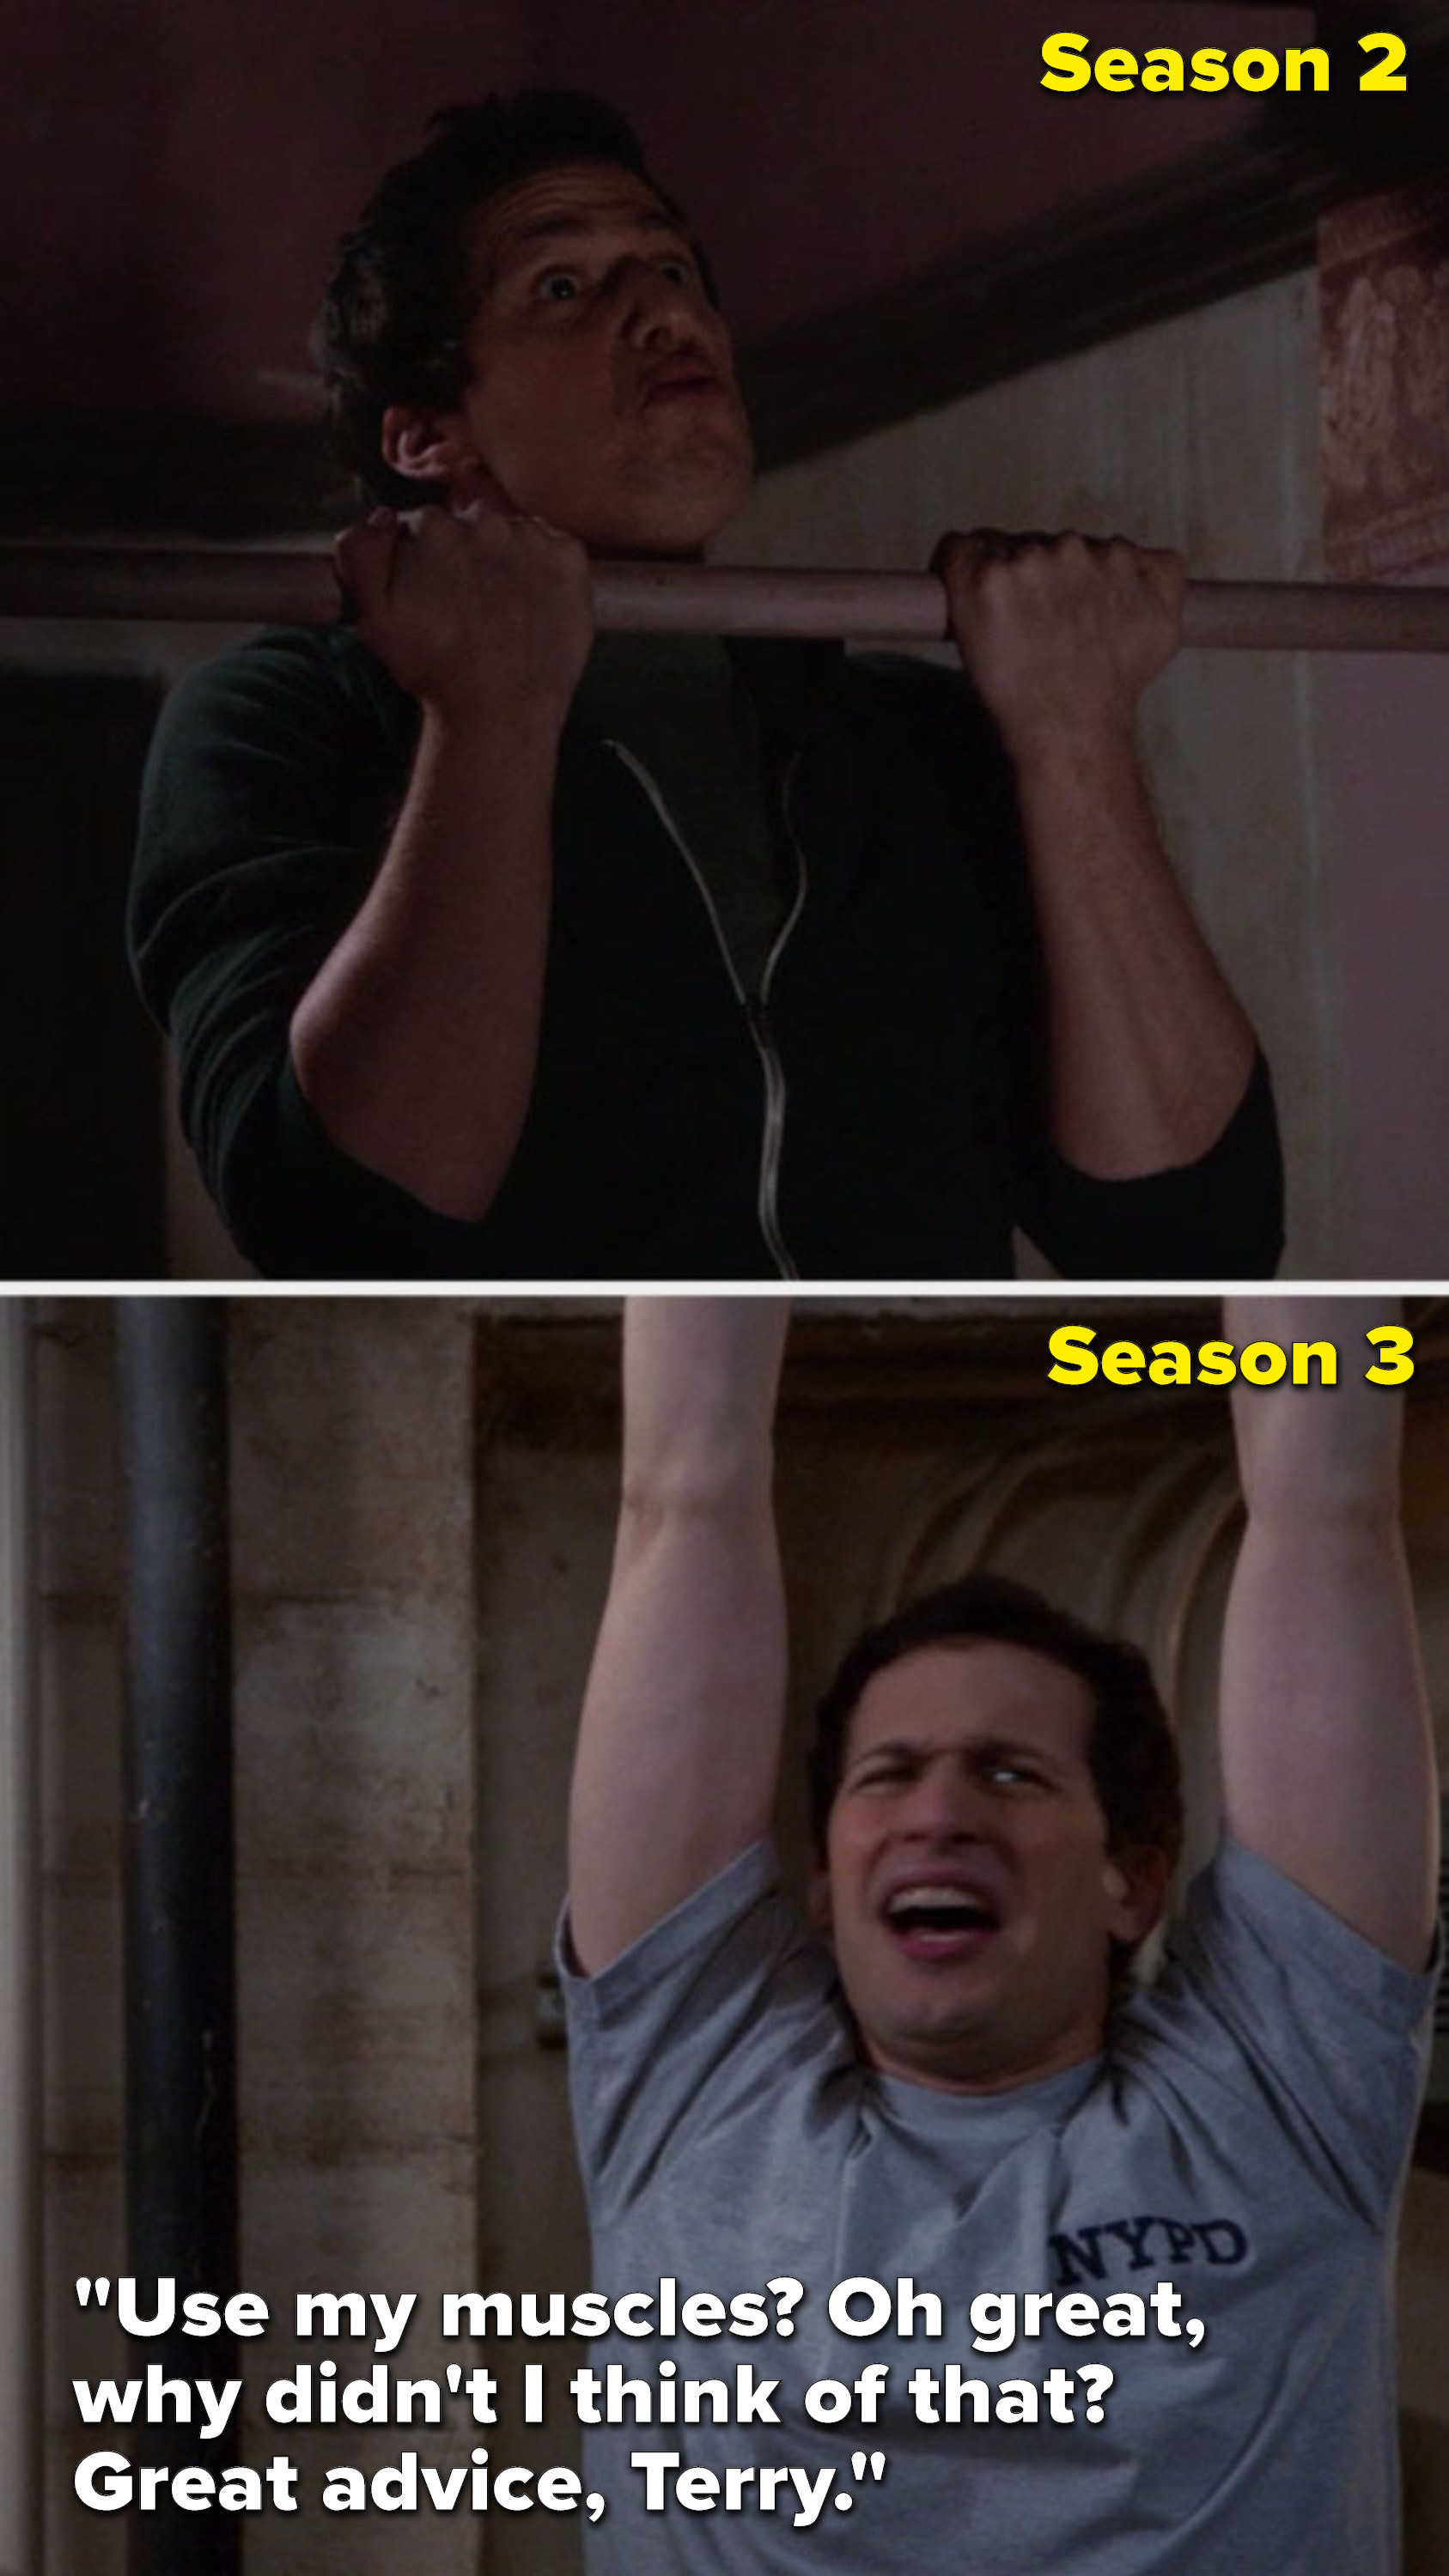 In Season 2, Jake does a pull-up, but in Season 3 he is hanging and says, &quot;Use my muscles, oh great, why didn&#x27;t I think of that, great advice, Terry&quot;